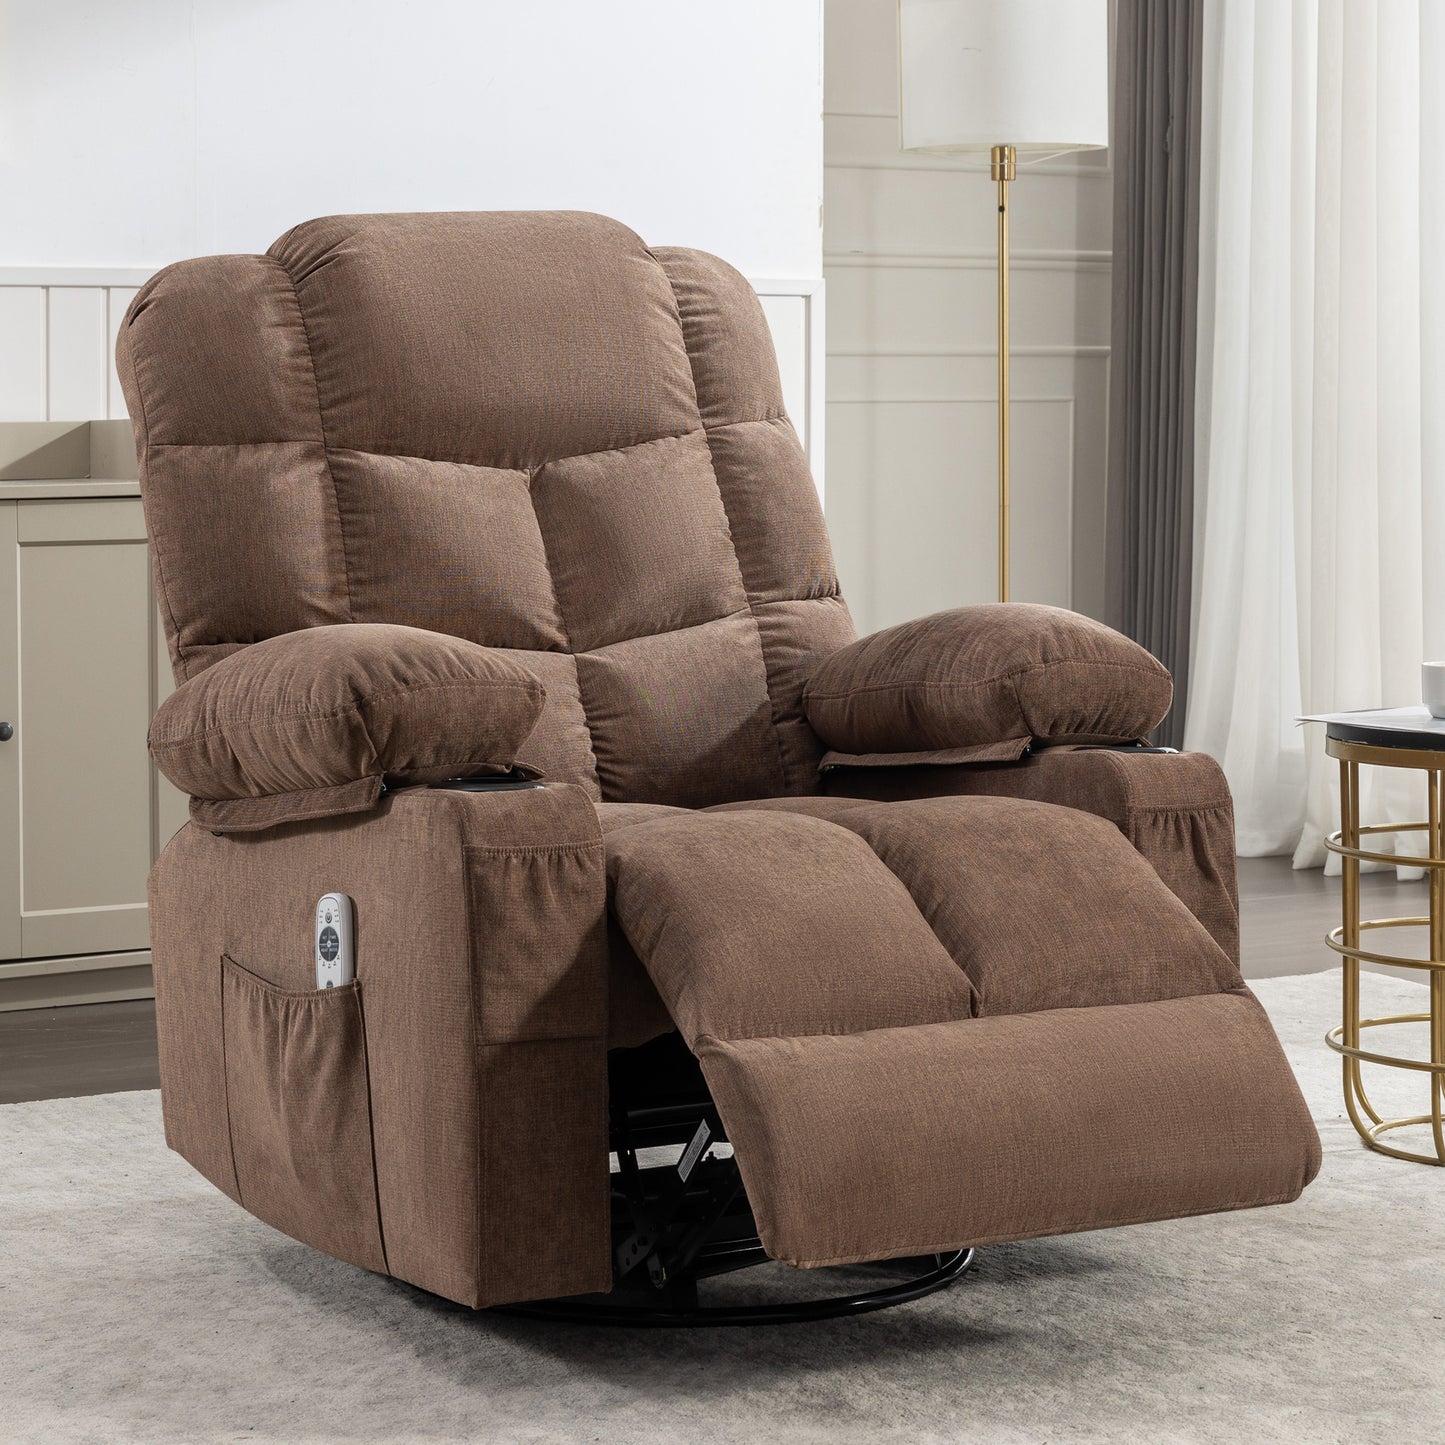 Power Lift Recliner Chair, HSUNNS 300lbs Capacity Electric Lift Recliner for Elderly, with Remote Control, Wide Seat, Side Pocket, Extended Footrest, Fabric Sofa Chairs for Living Room, Brown